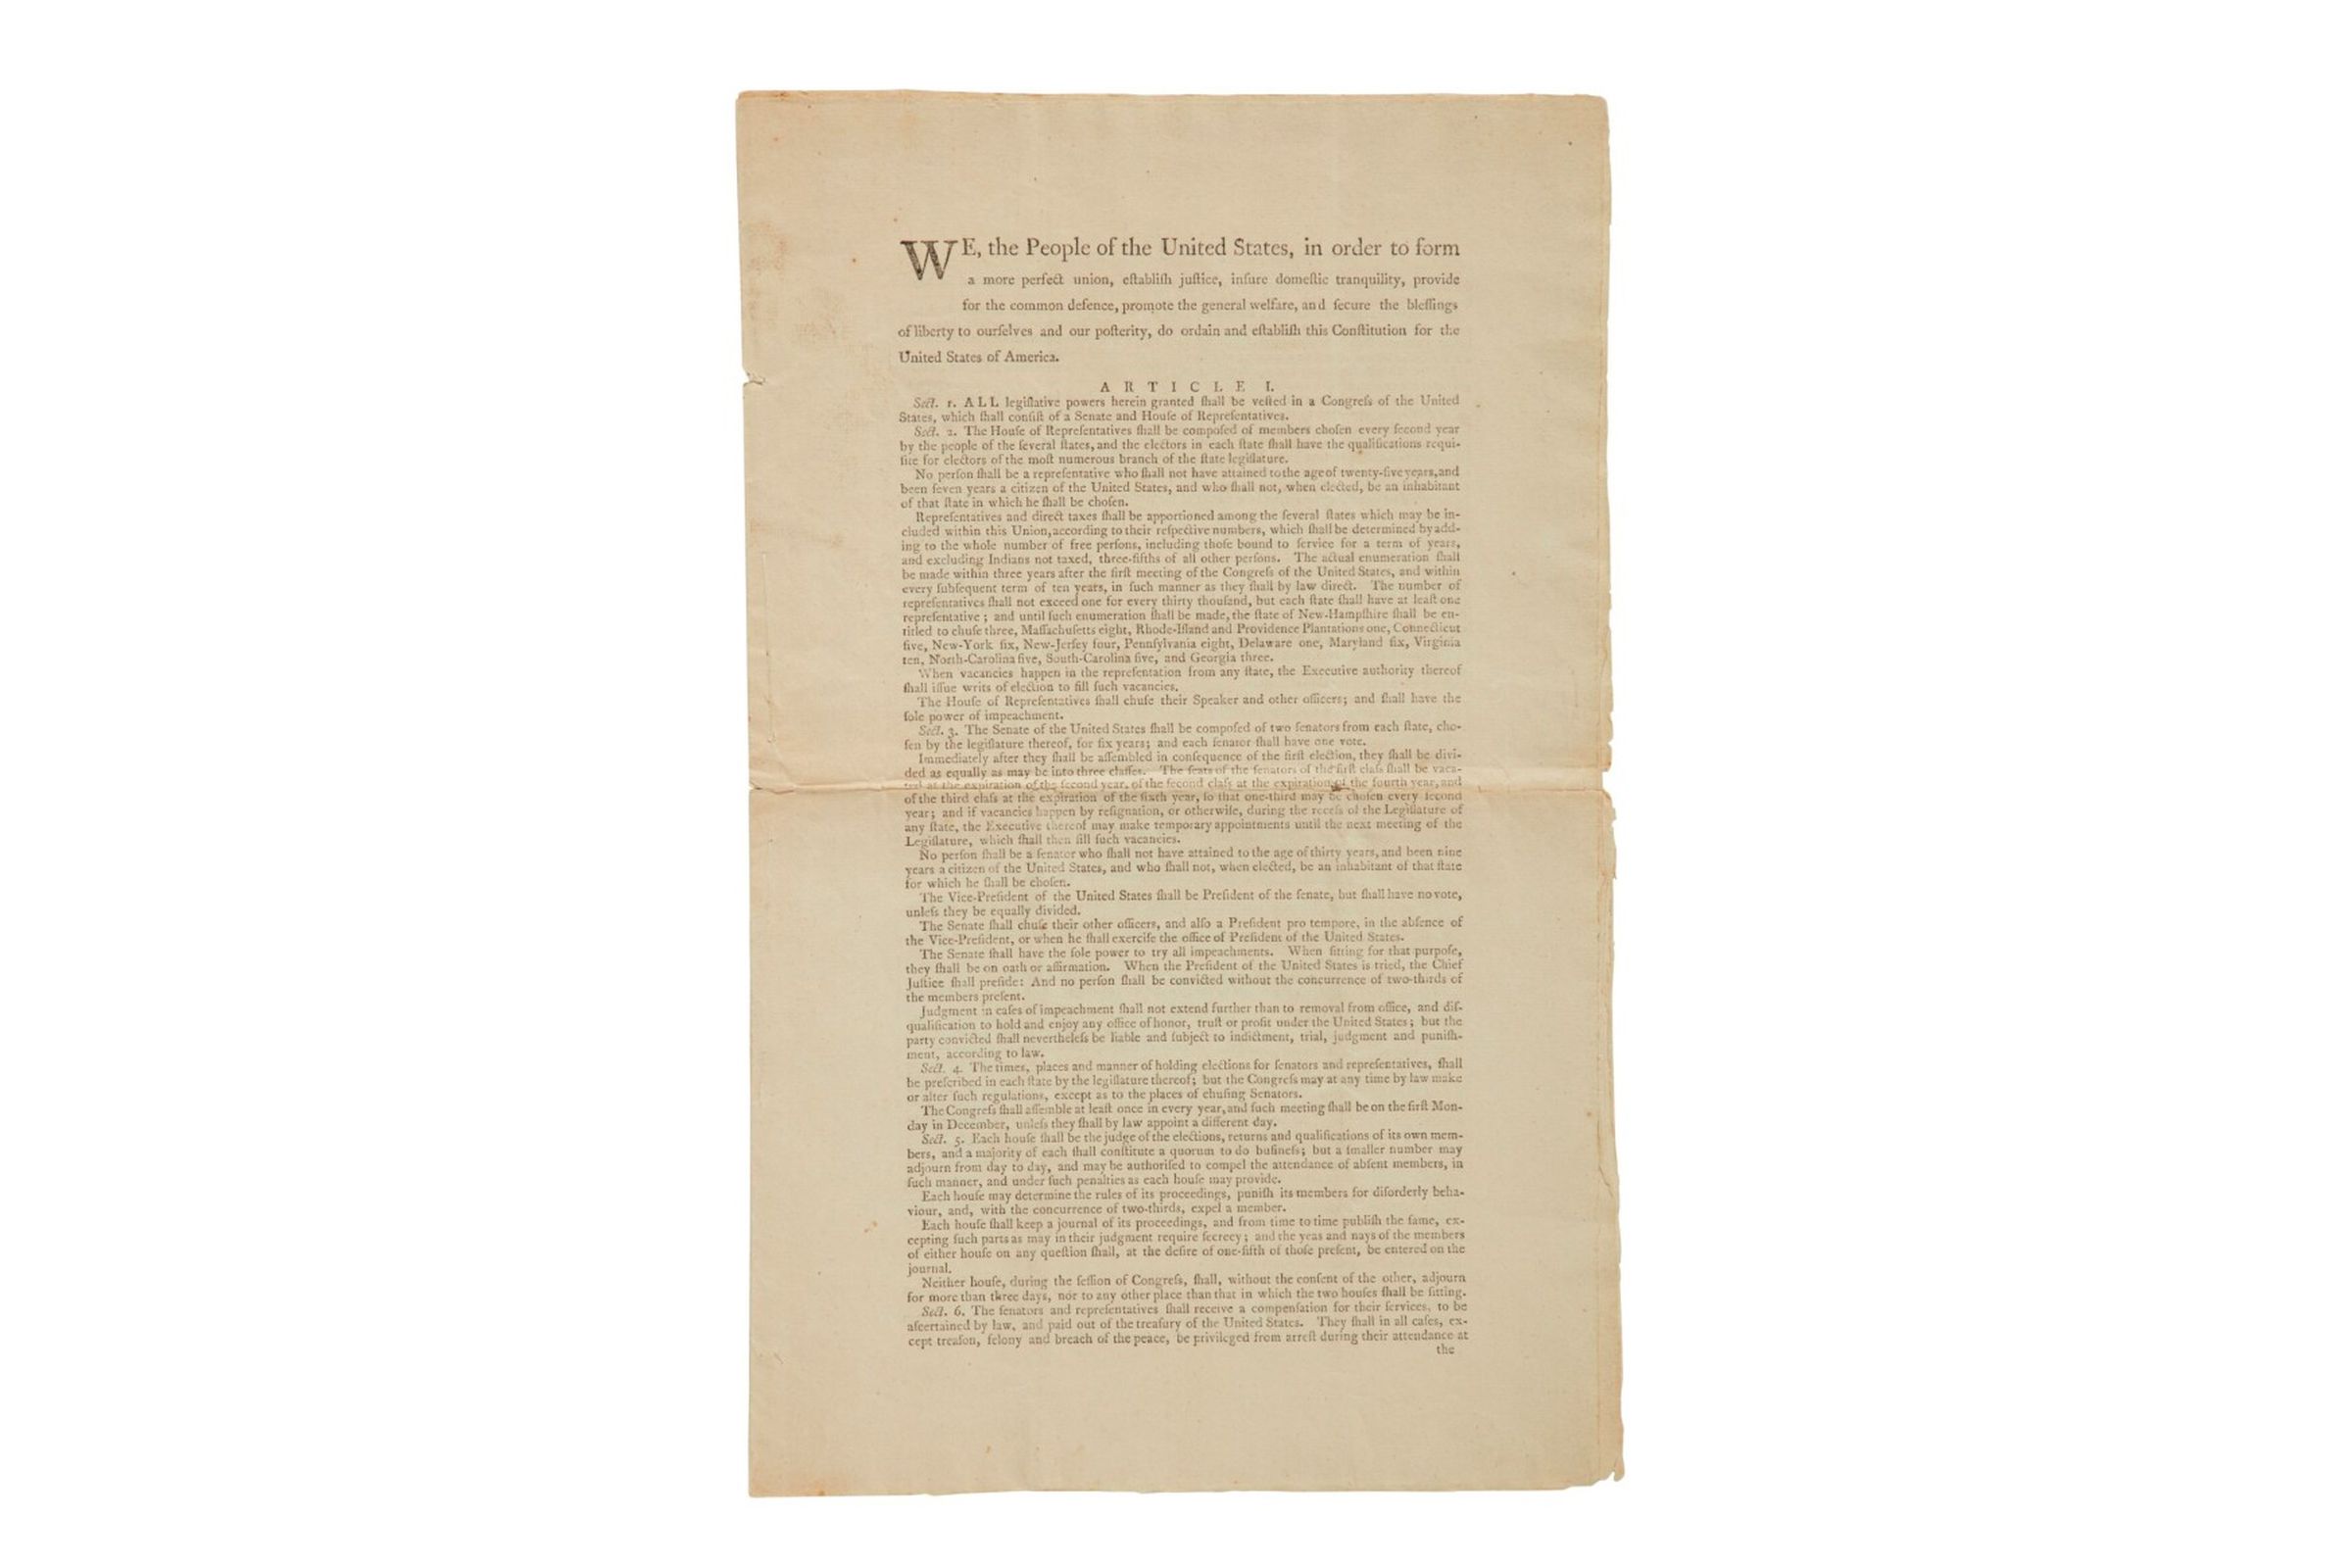 One of 13 remaining copies of the Official Edition of the Constitution.